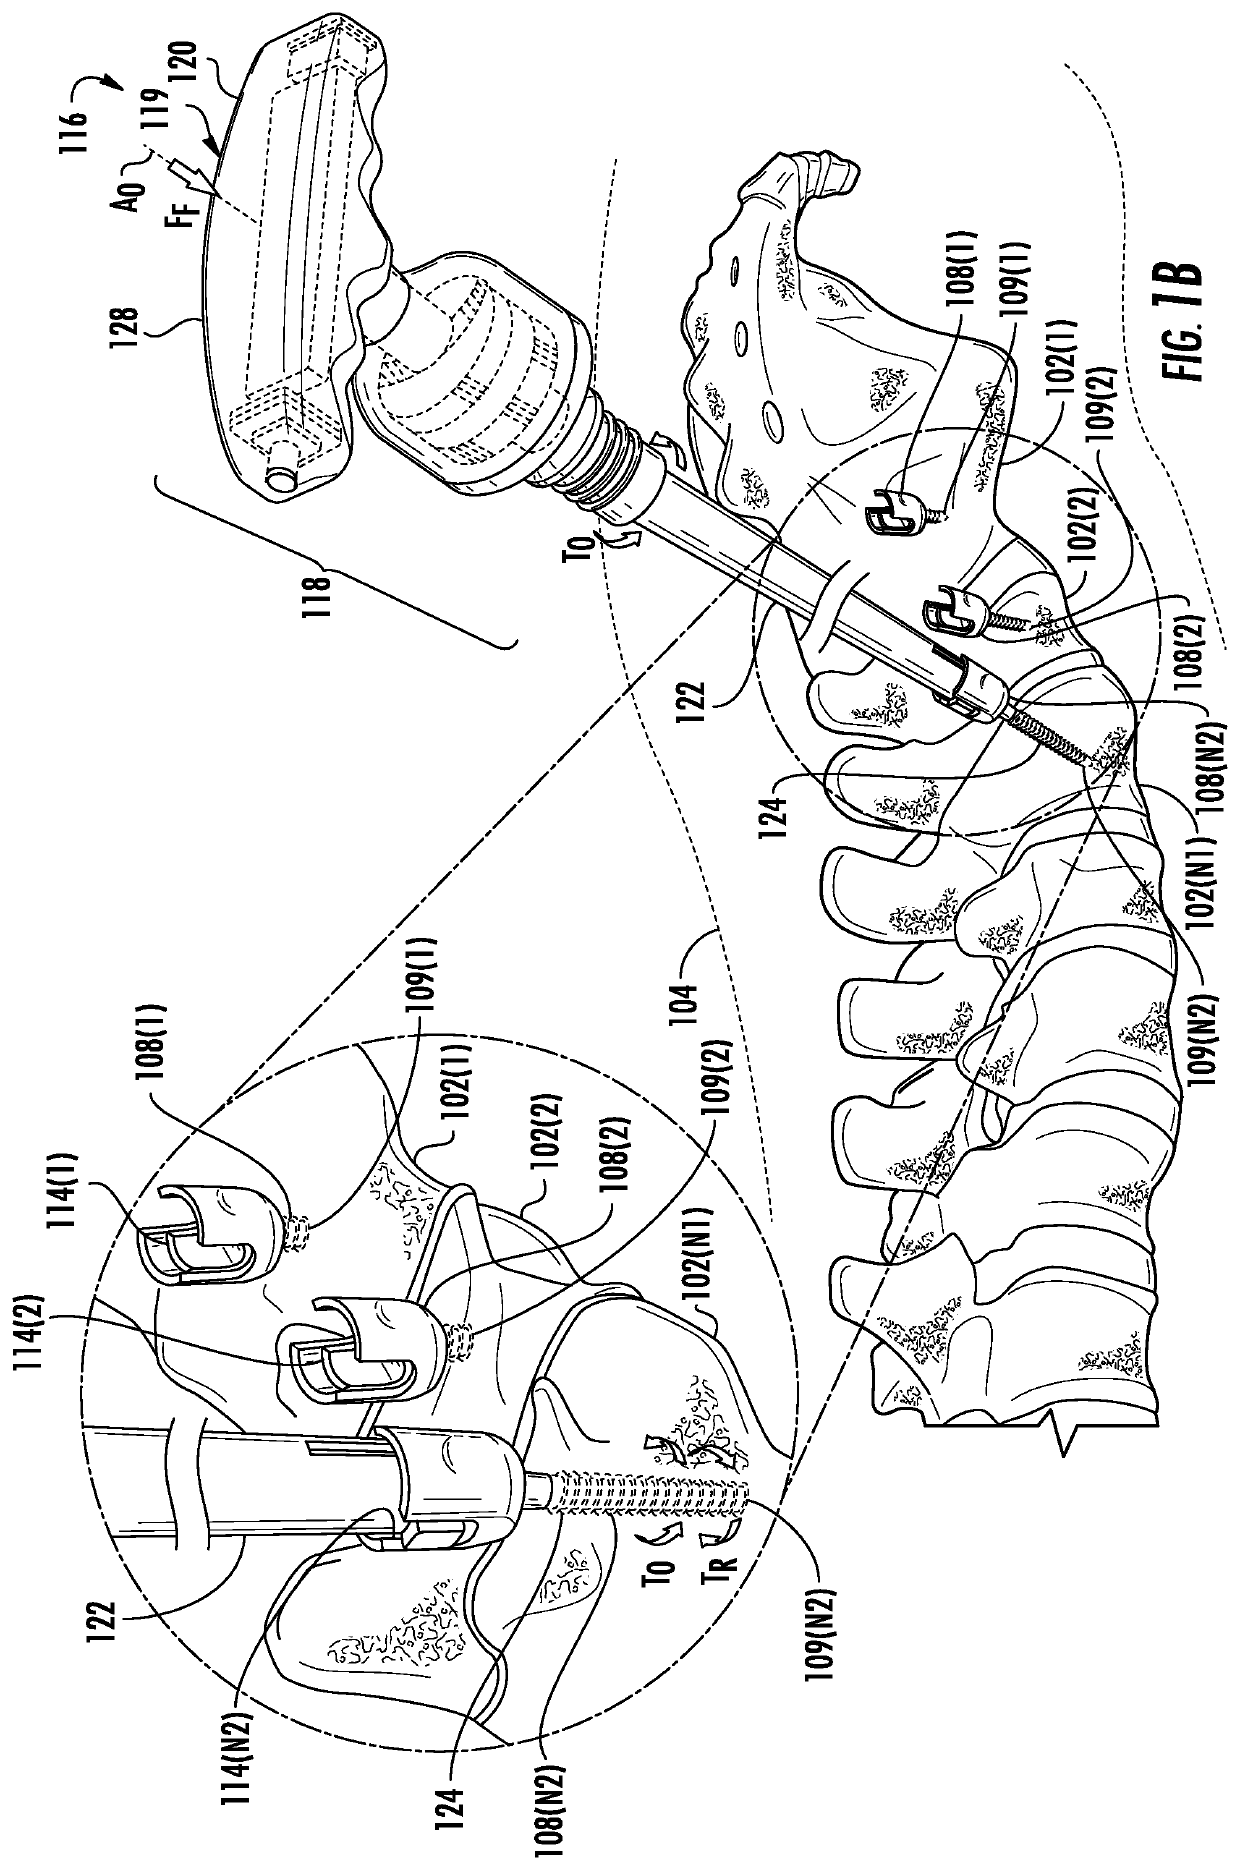 Multi-mode torque drivers employing Anti-backdrive units for managing pedicle screw attachments with vertebrae, and related systems and methods